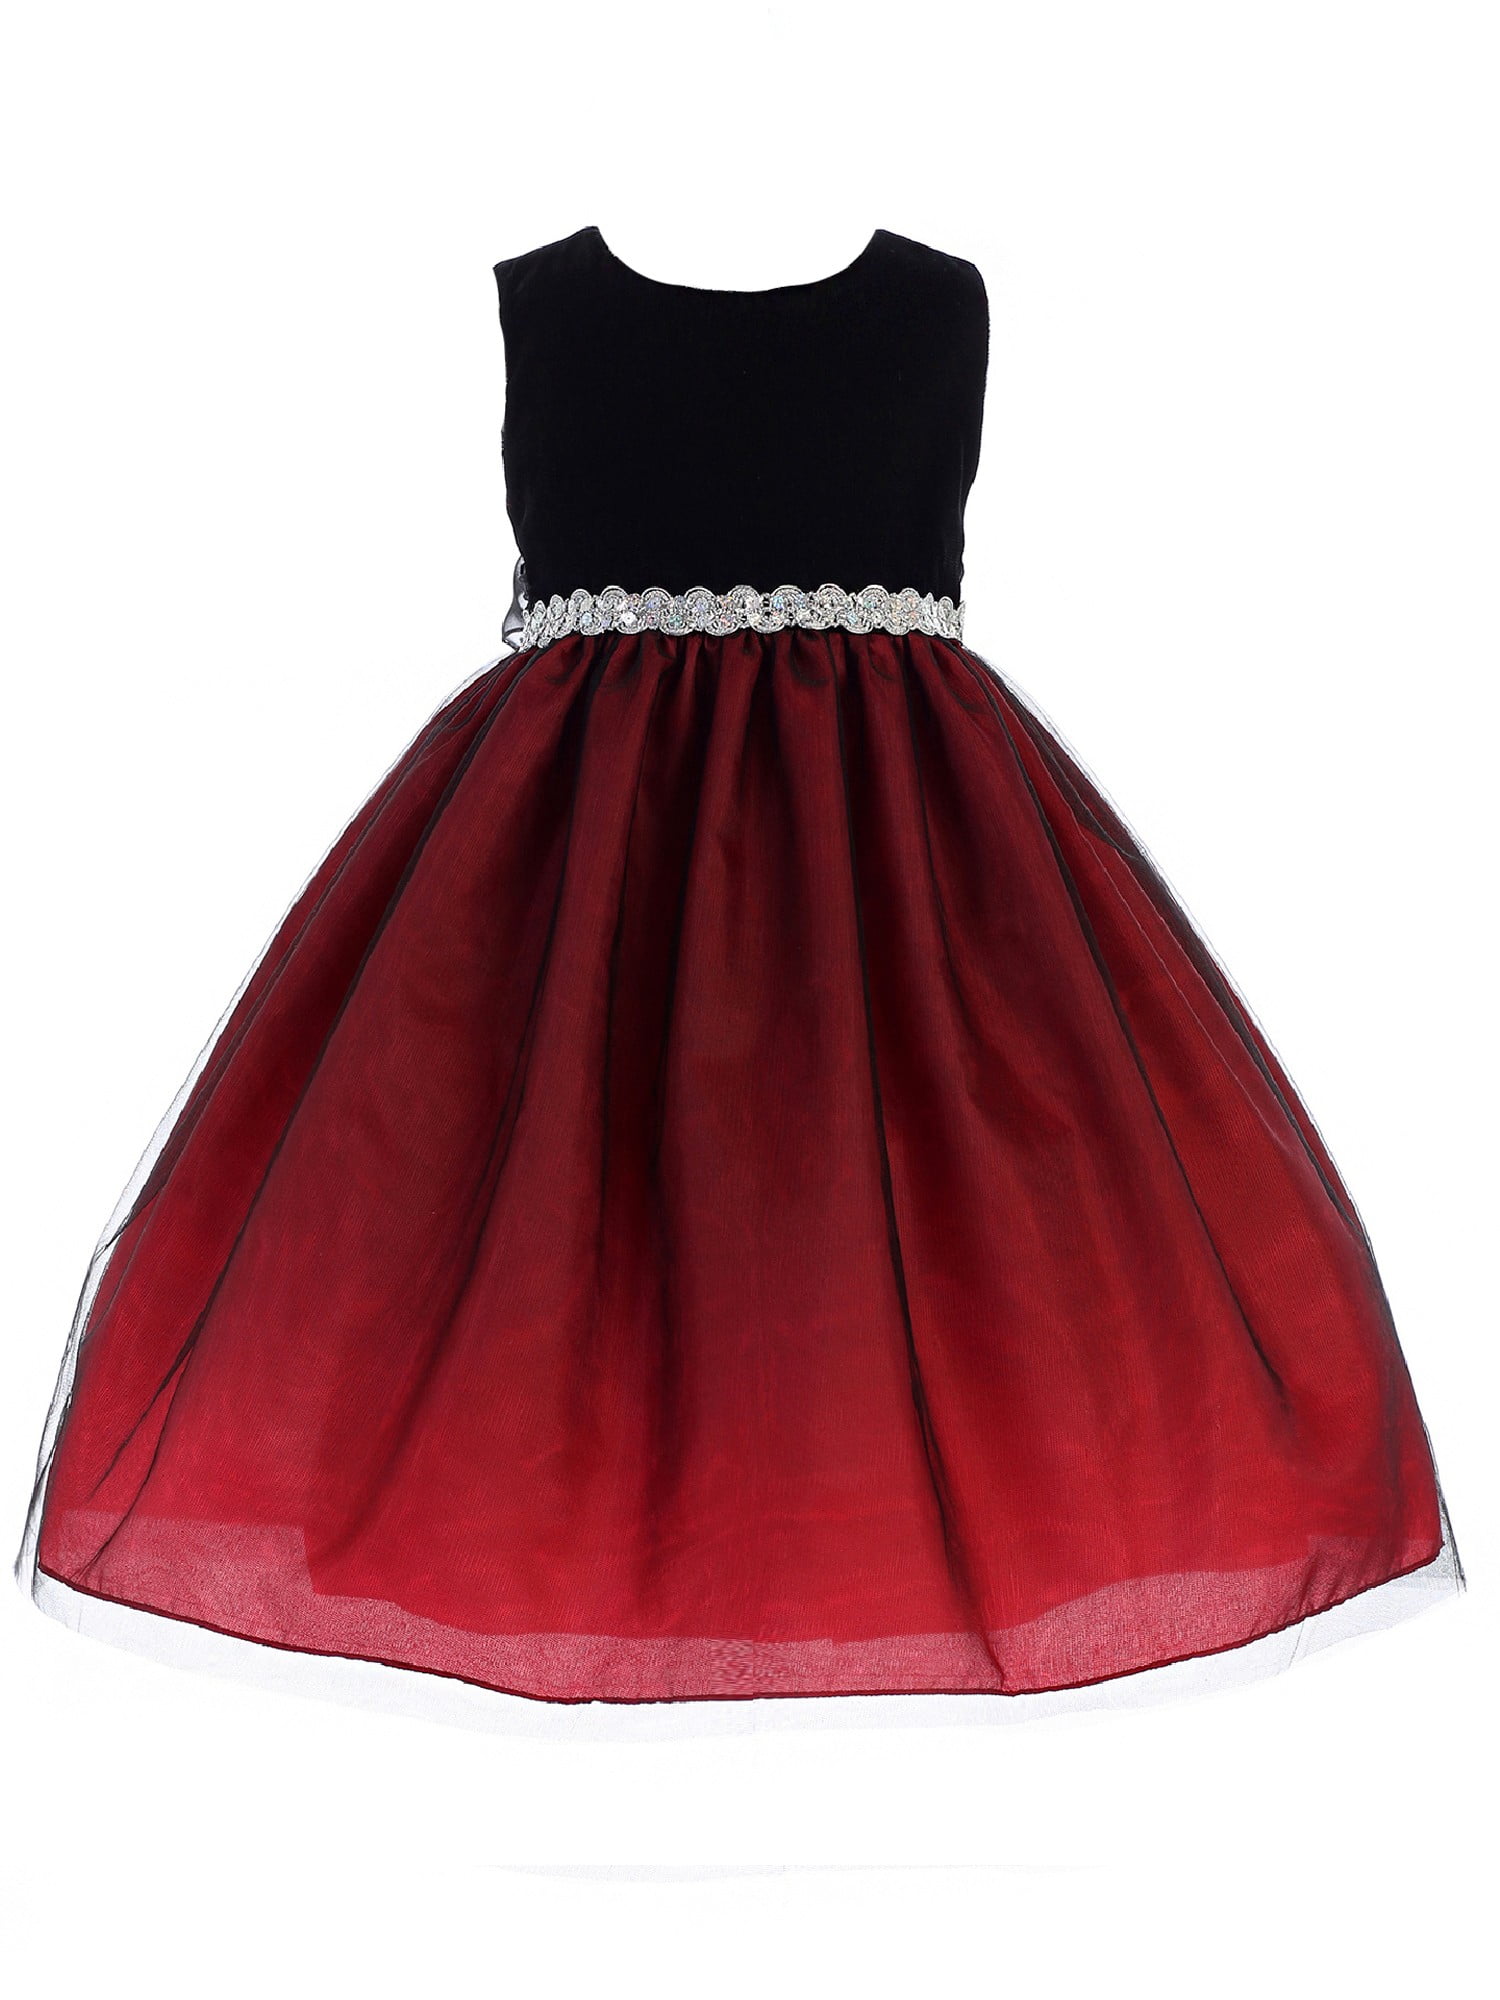 Little Girl Black And Red Dresses on ...